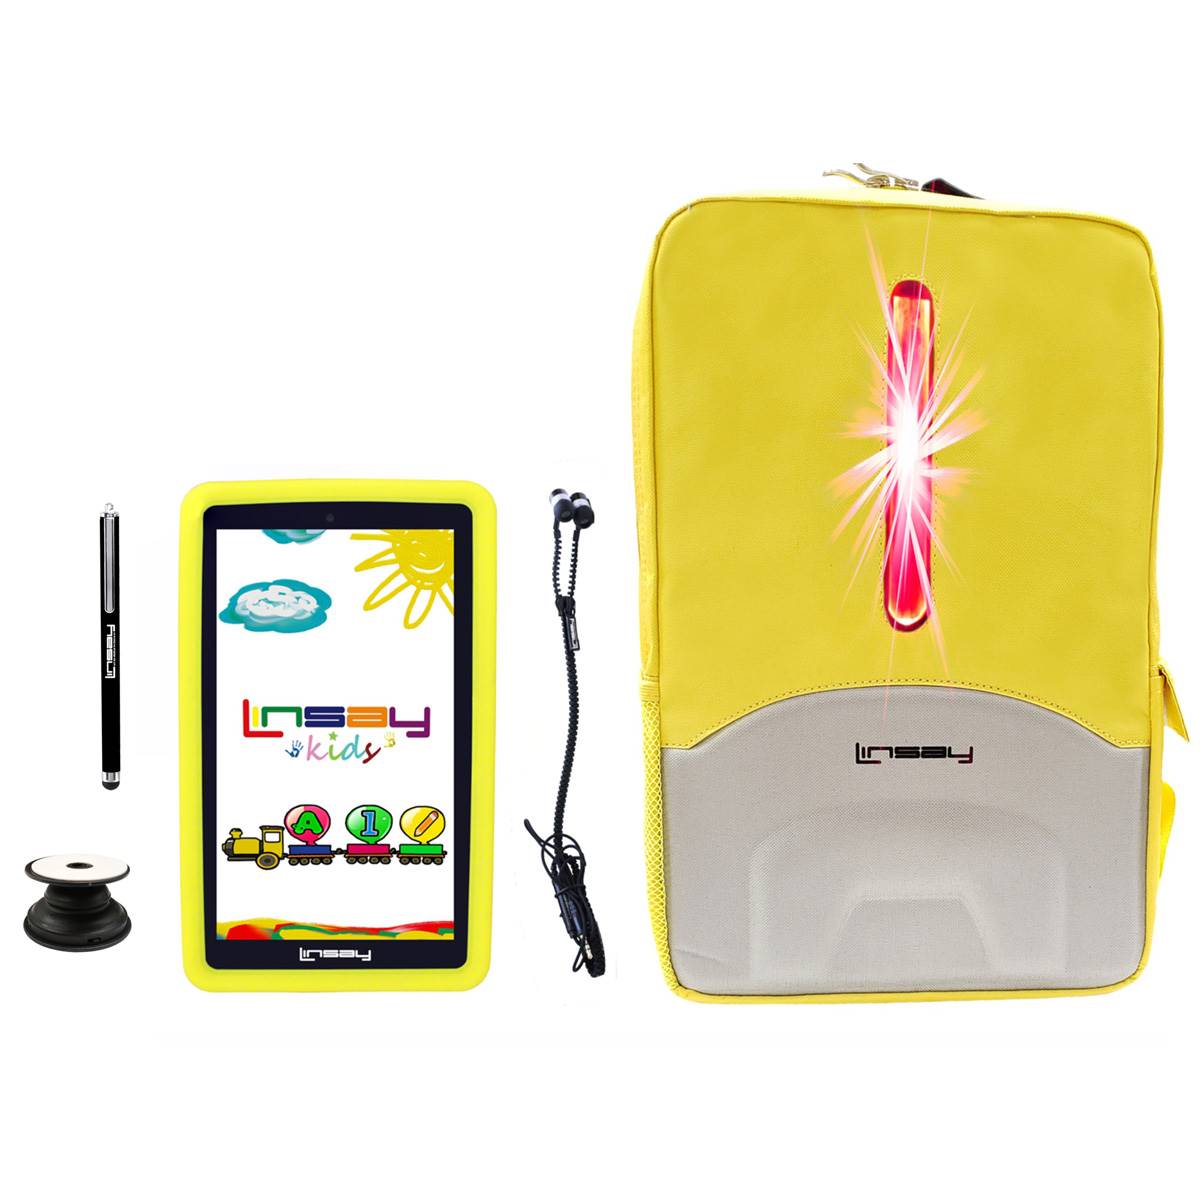 Kids Linsay 7in. Quad Core Tablet With LED Backpack